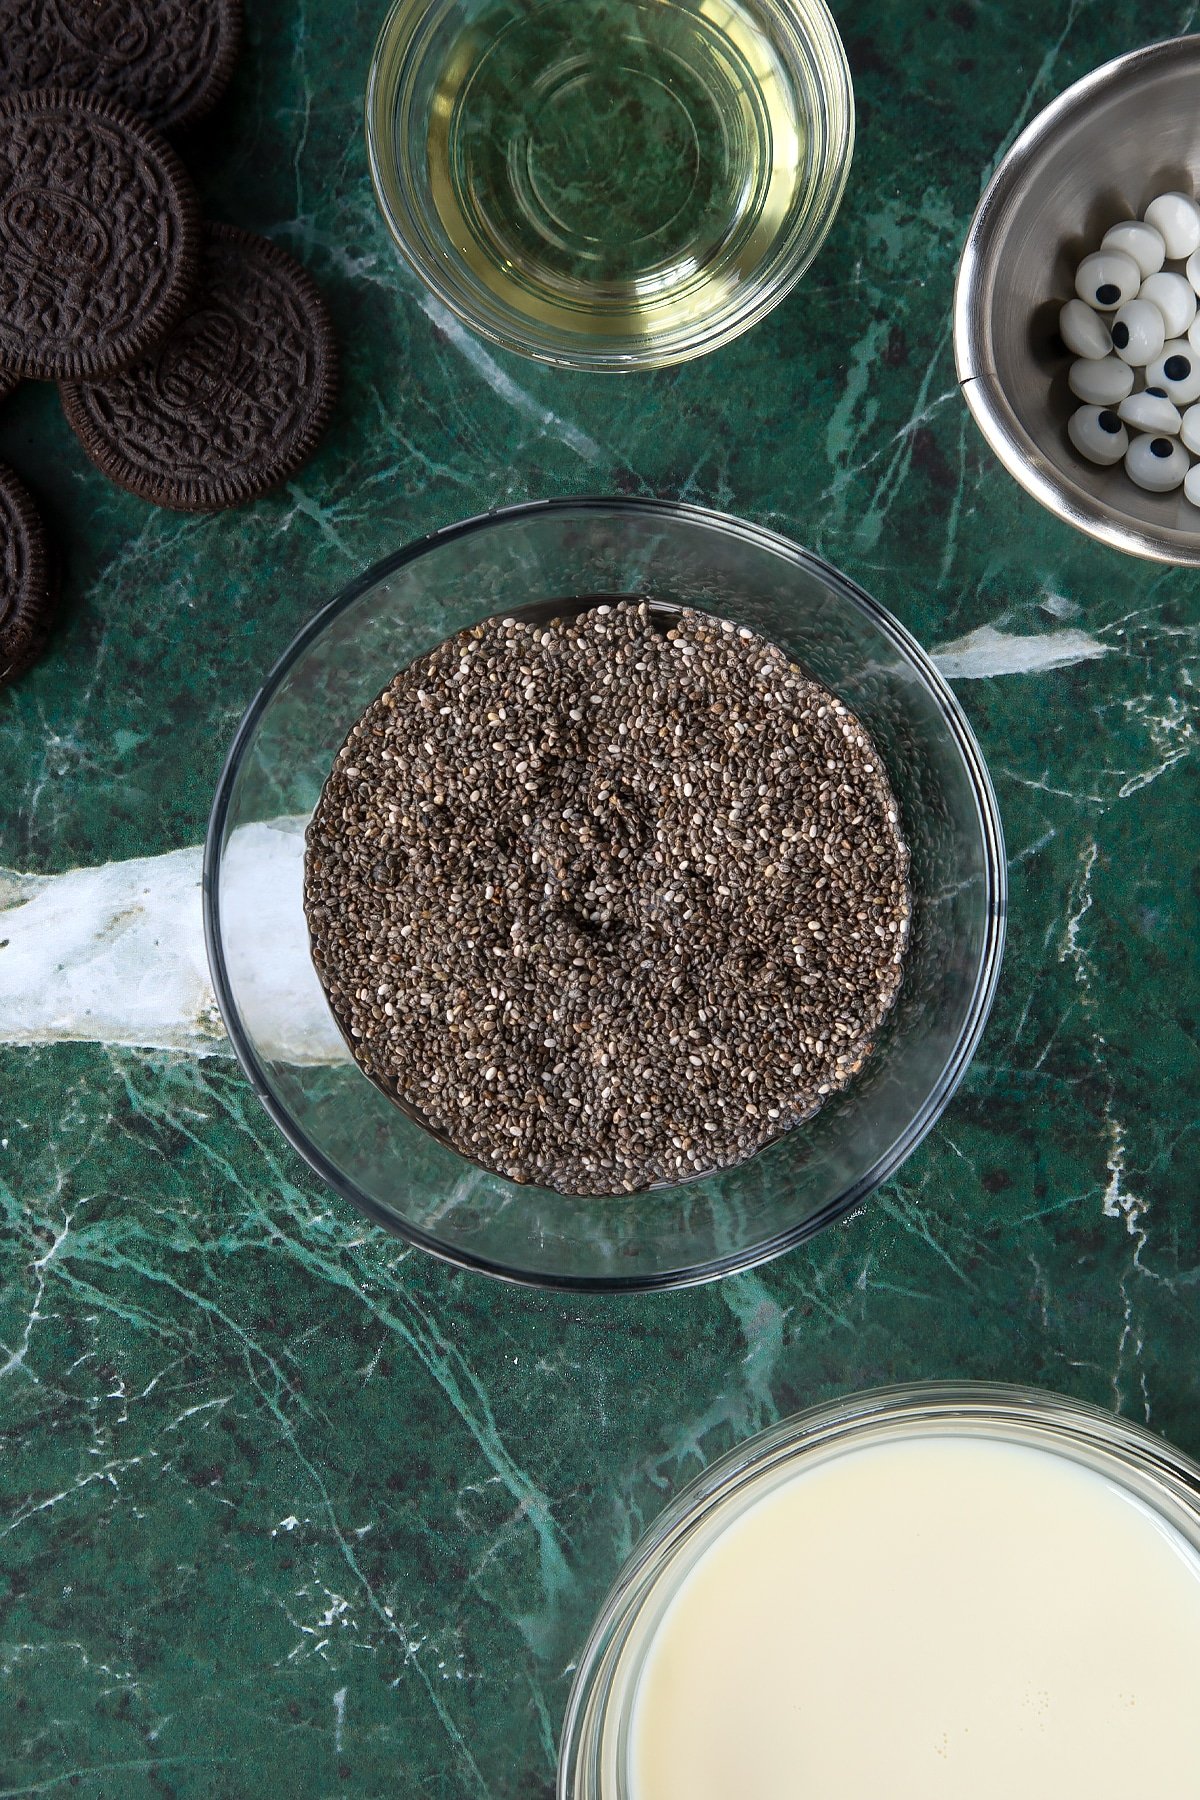 Chia seeds and water in a small glass bowl. Ingredients to make vegan Halloween cupcakes surround the bowl.